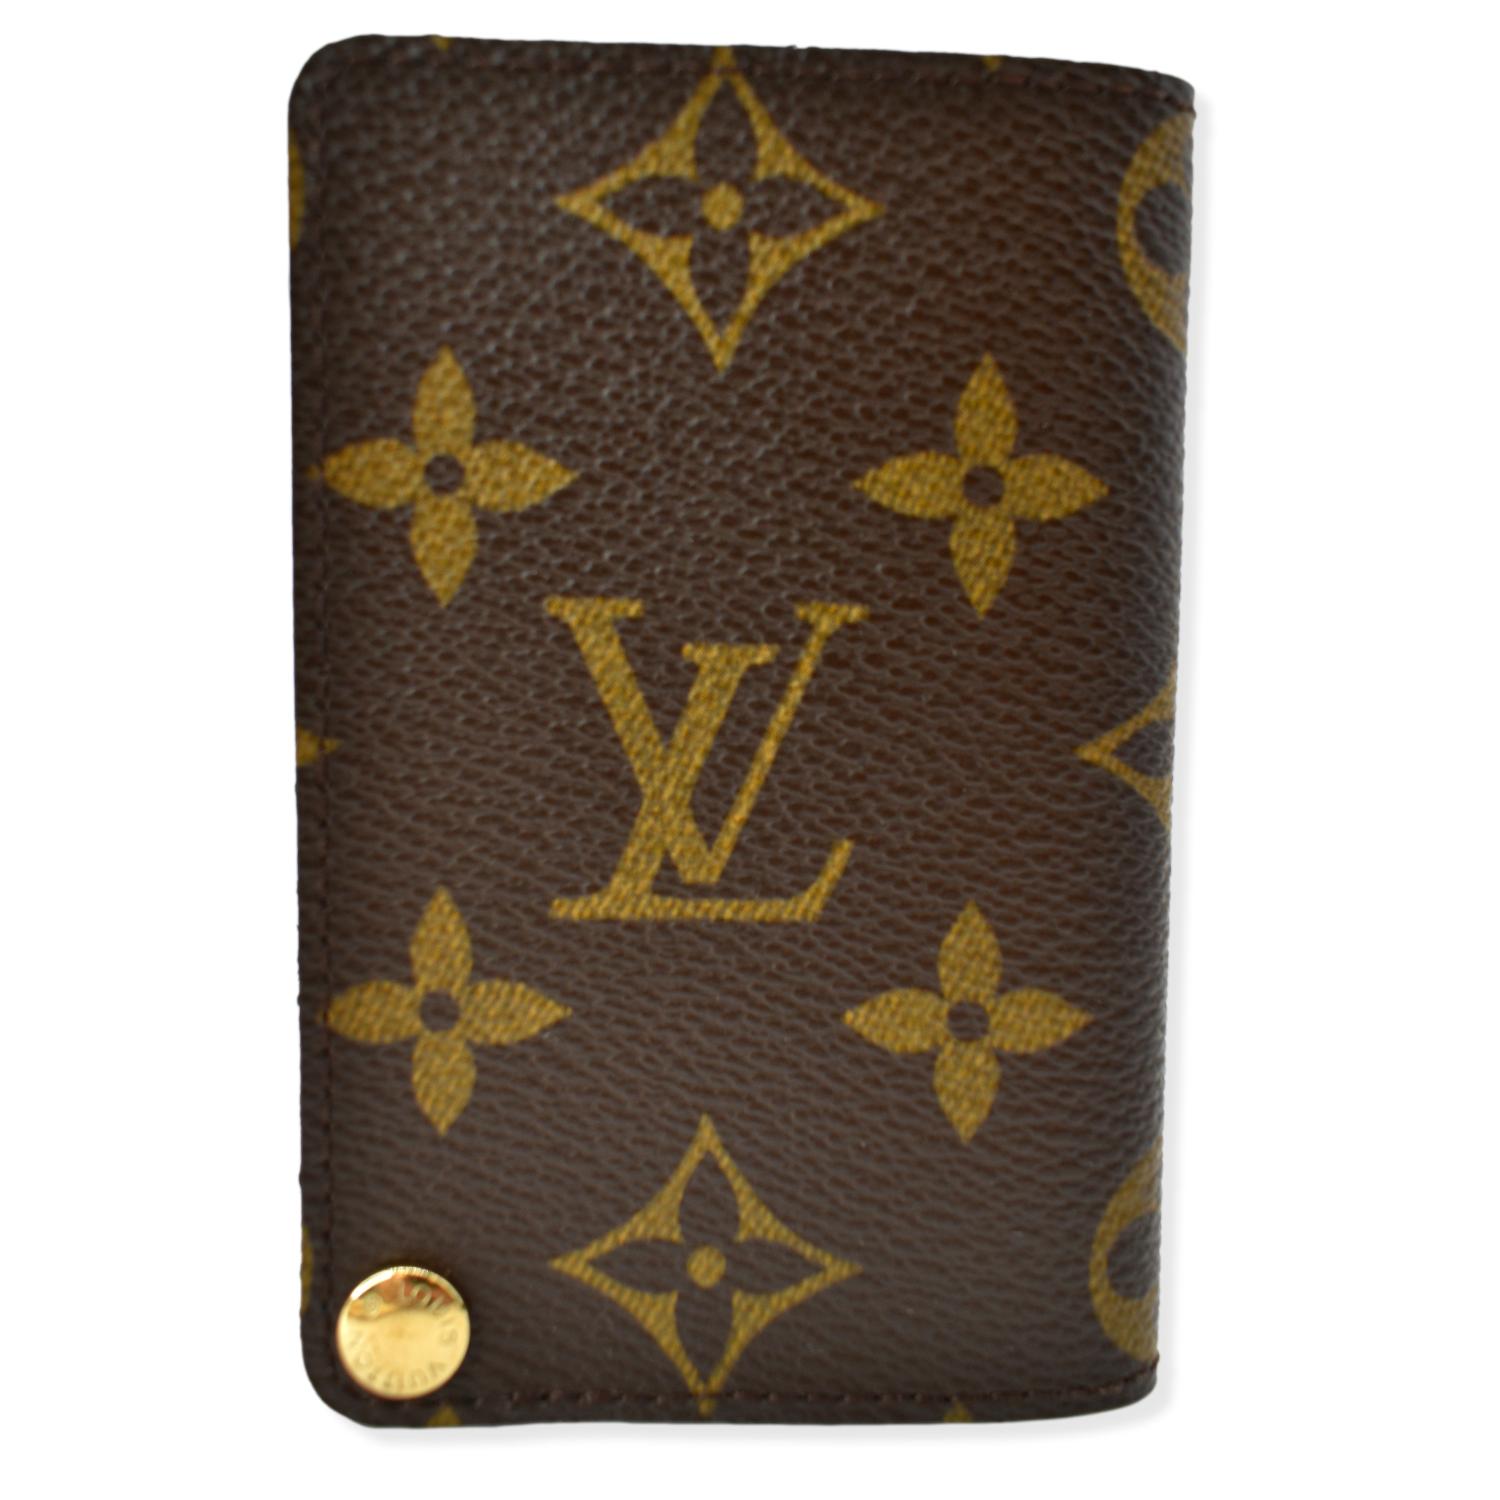 TheDesignDeskNY on X: 🚨New Card Alert 🚨 Louis Vuitton Birthday